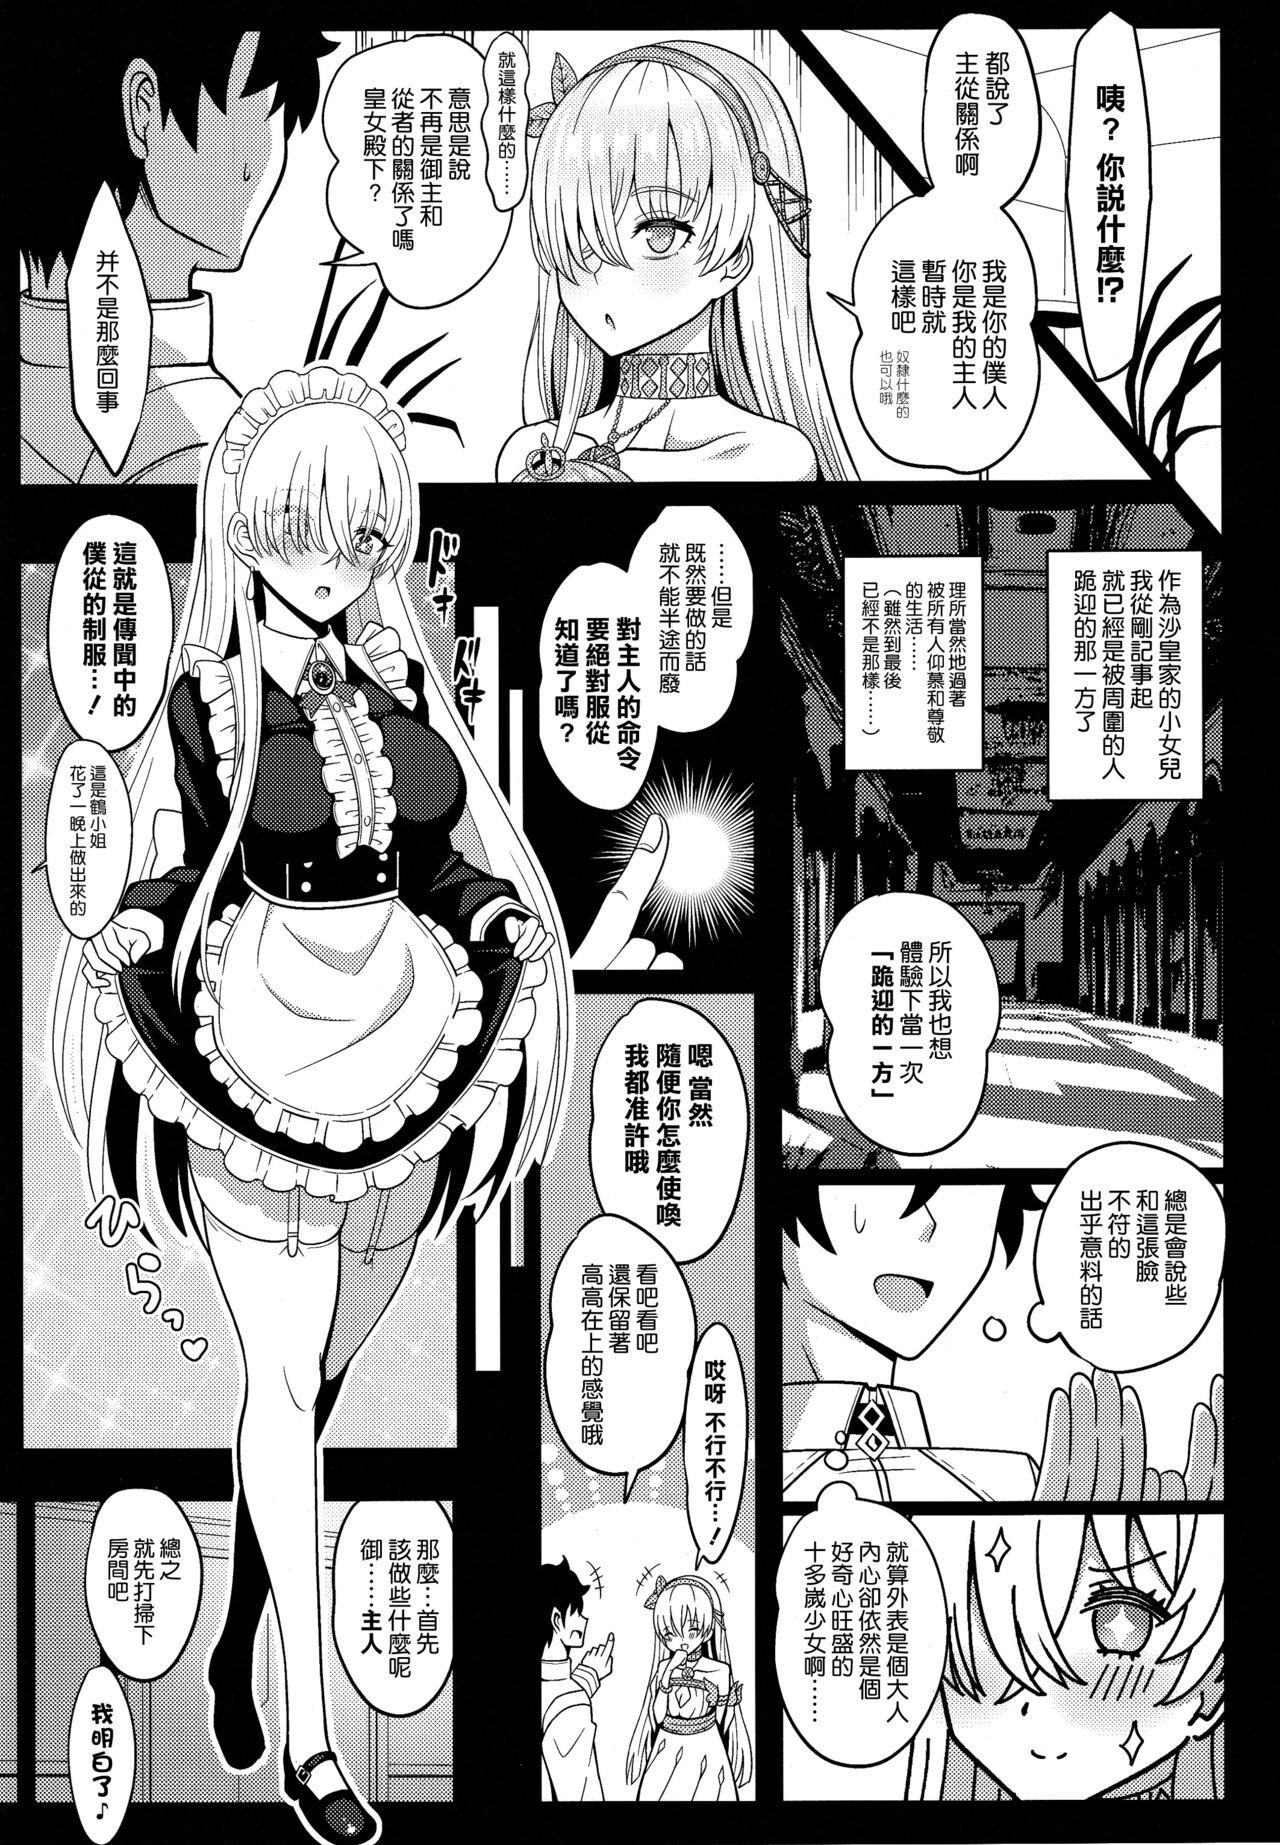 Classy 皇女様と卵 - Fate grand order Gaygroupsex - Page 6